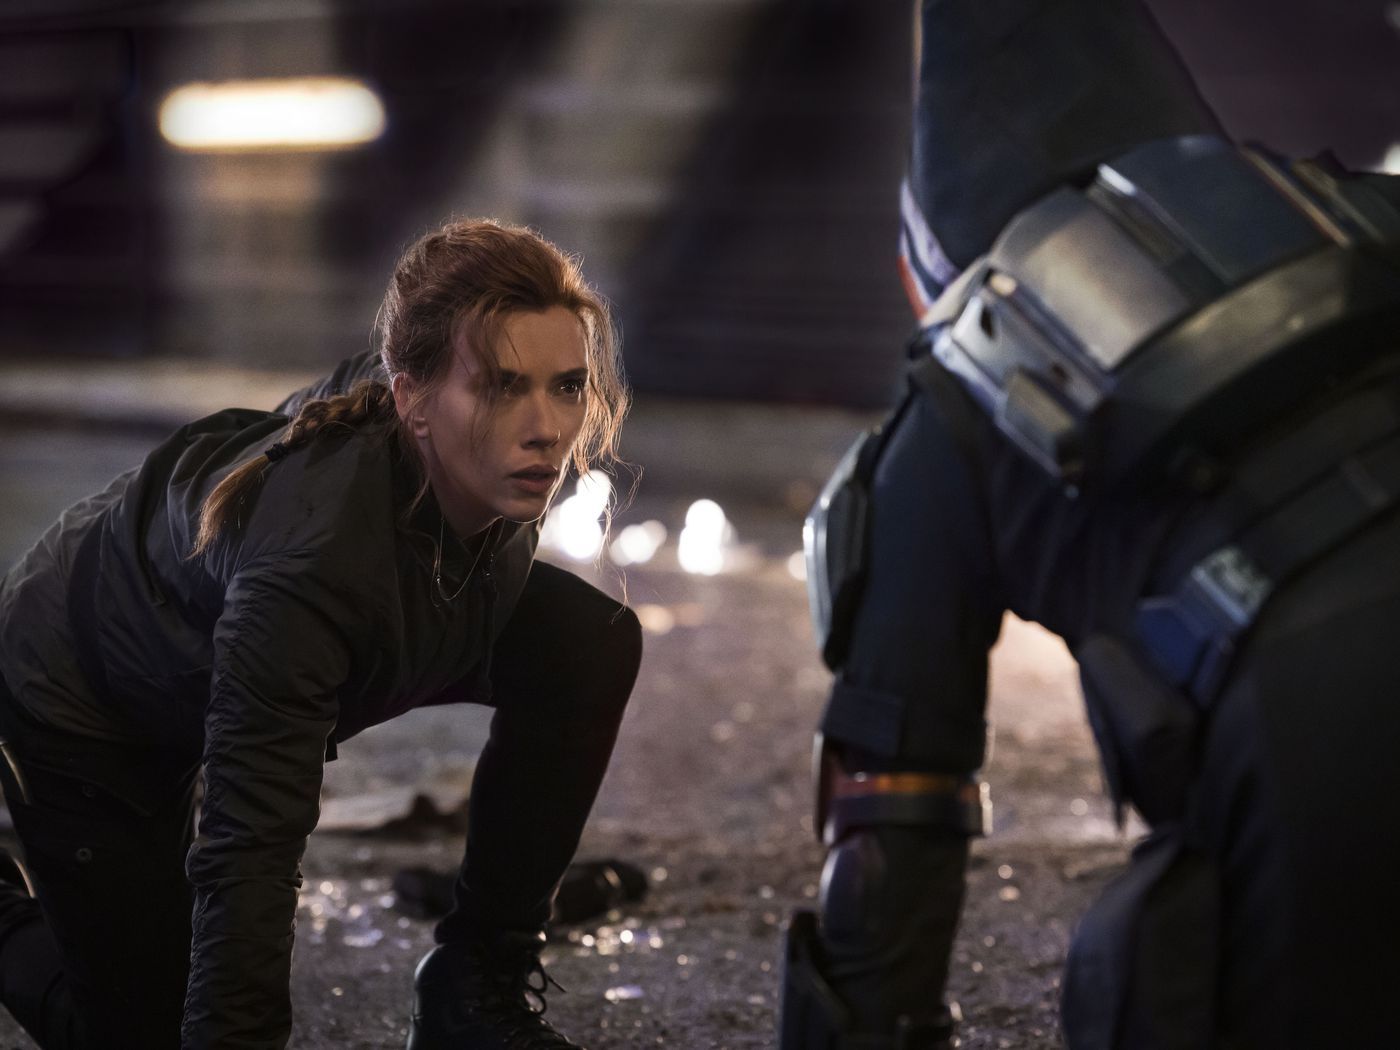 Marvel's 'Black Widow': Which movies should you watch before seeing it?